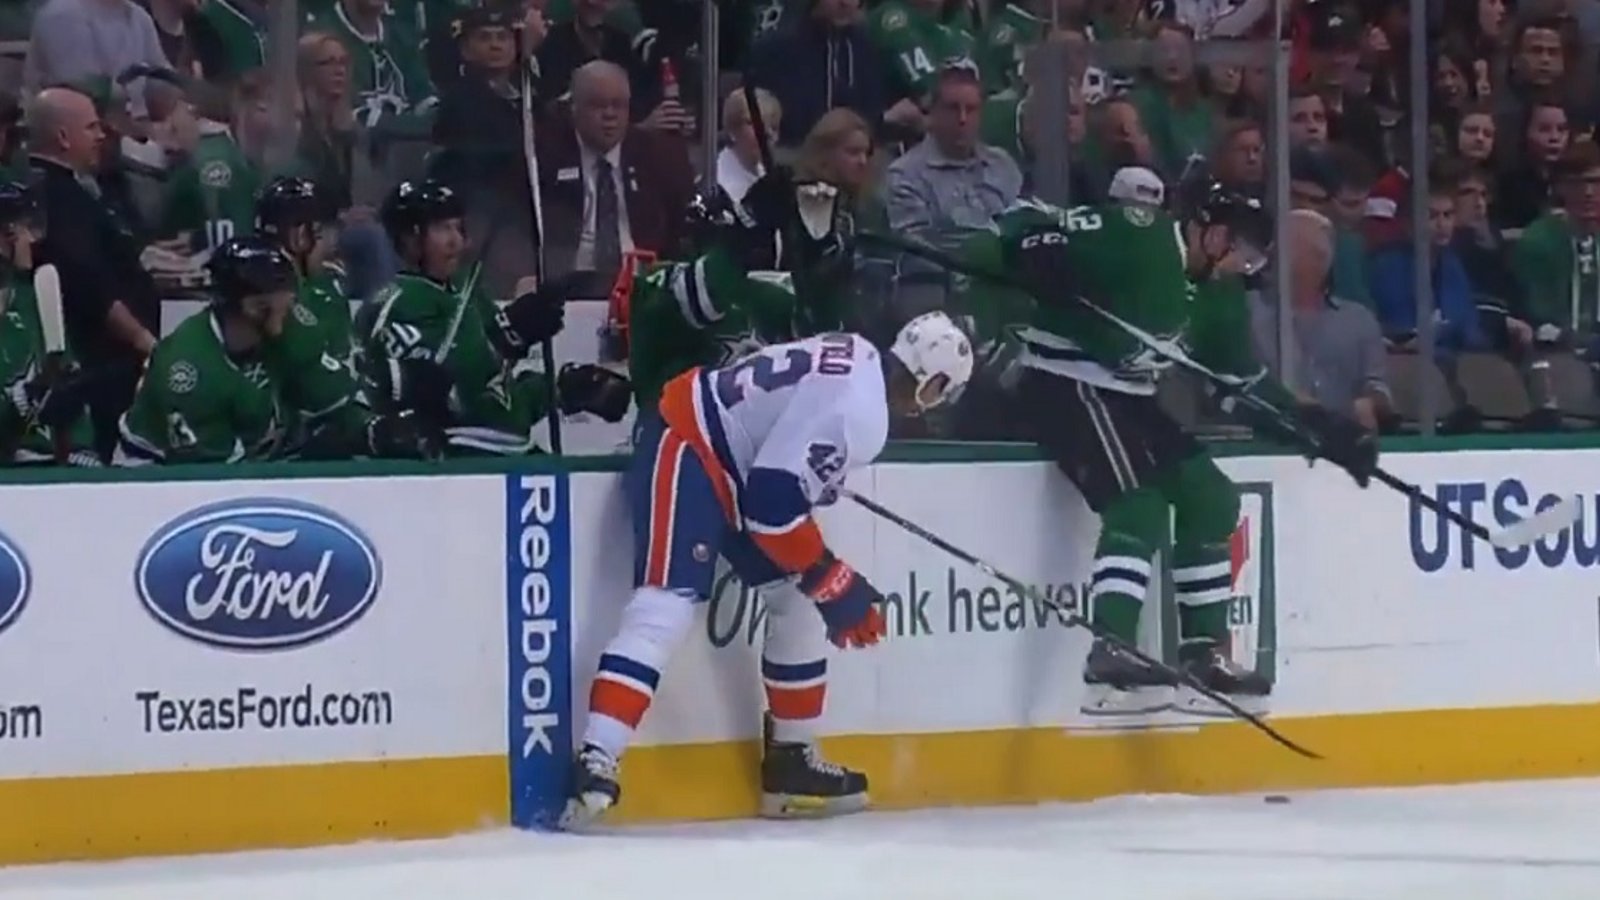 NHL forward dodges hit by riding the boards and scores incredible goal.